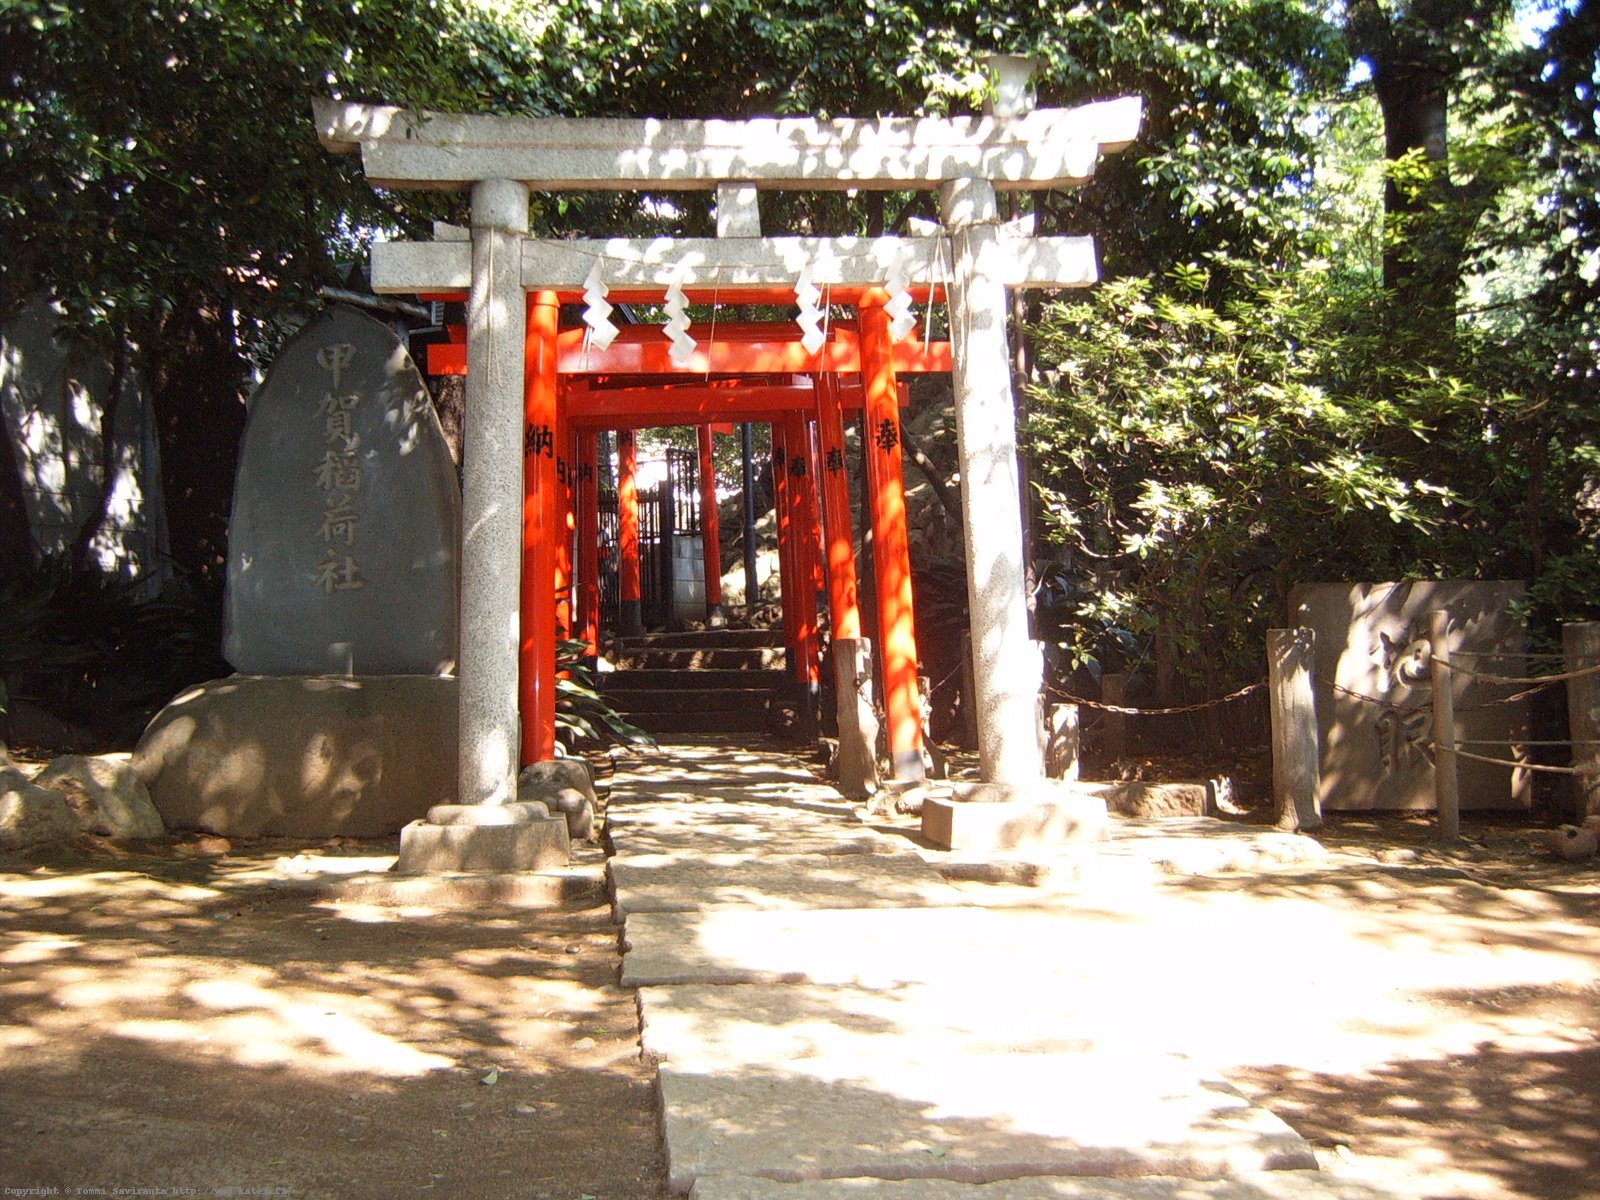 Day #2: Gate to the altar in a small temple in Tokyo